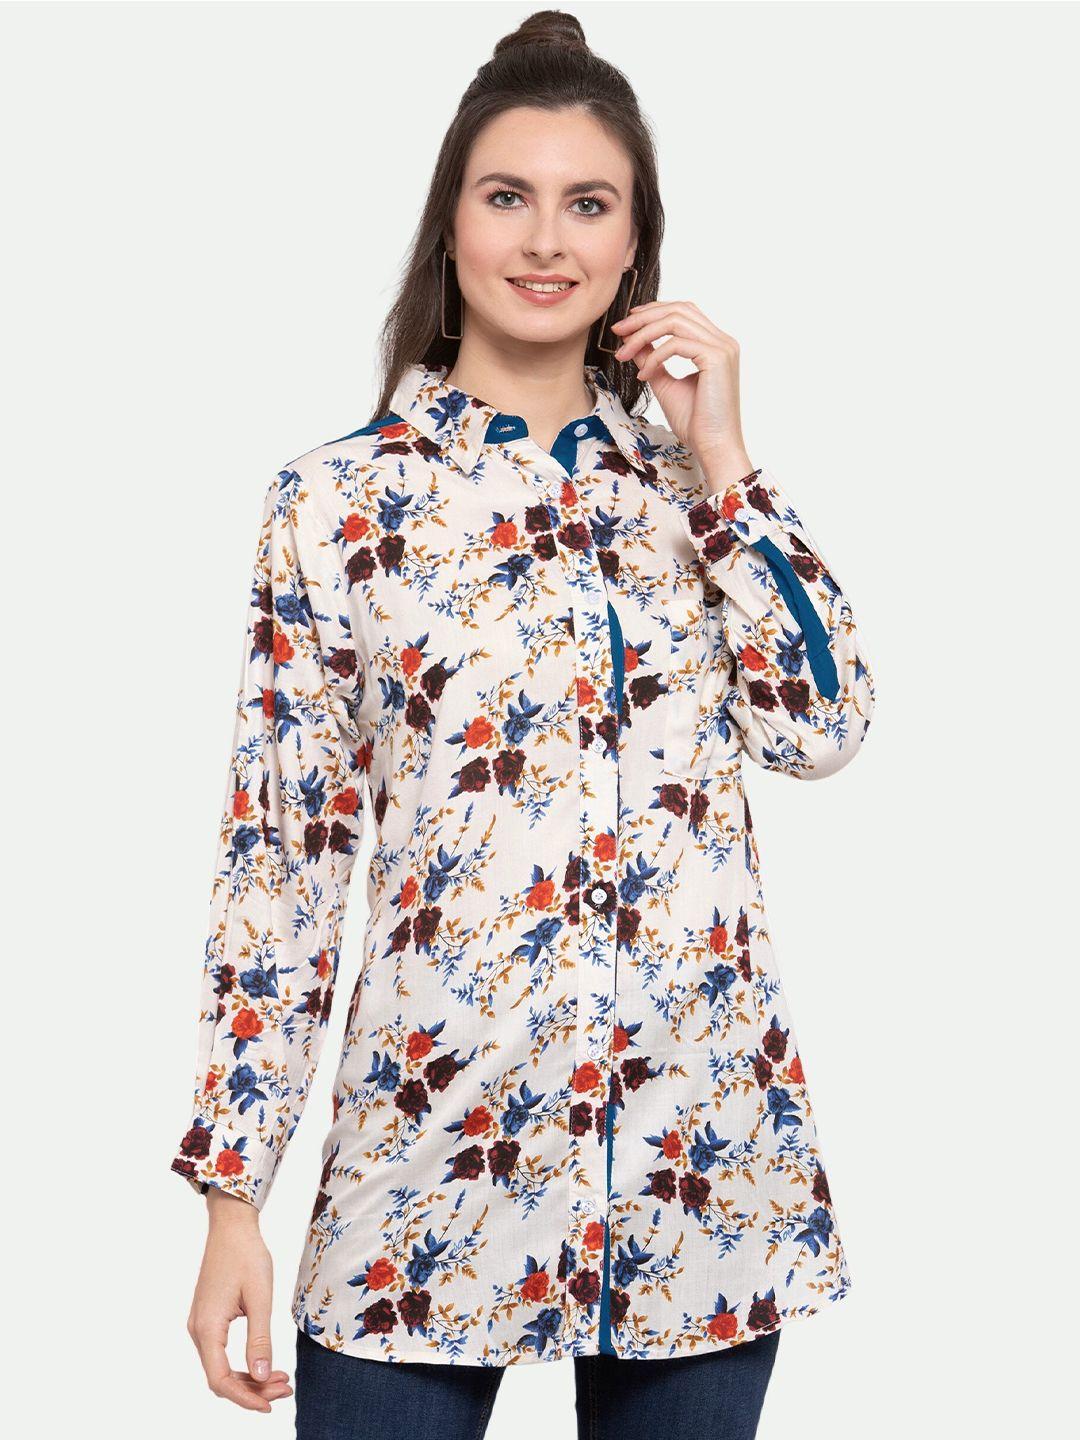 patrorna  plus size women off white comfort floral printed casual shirt